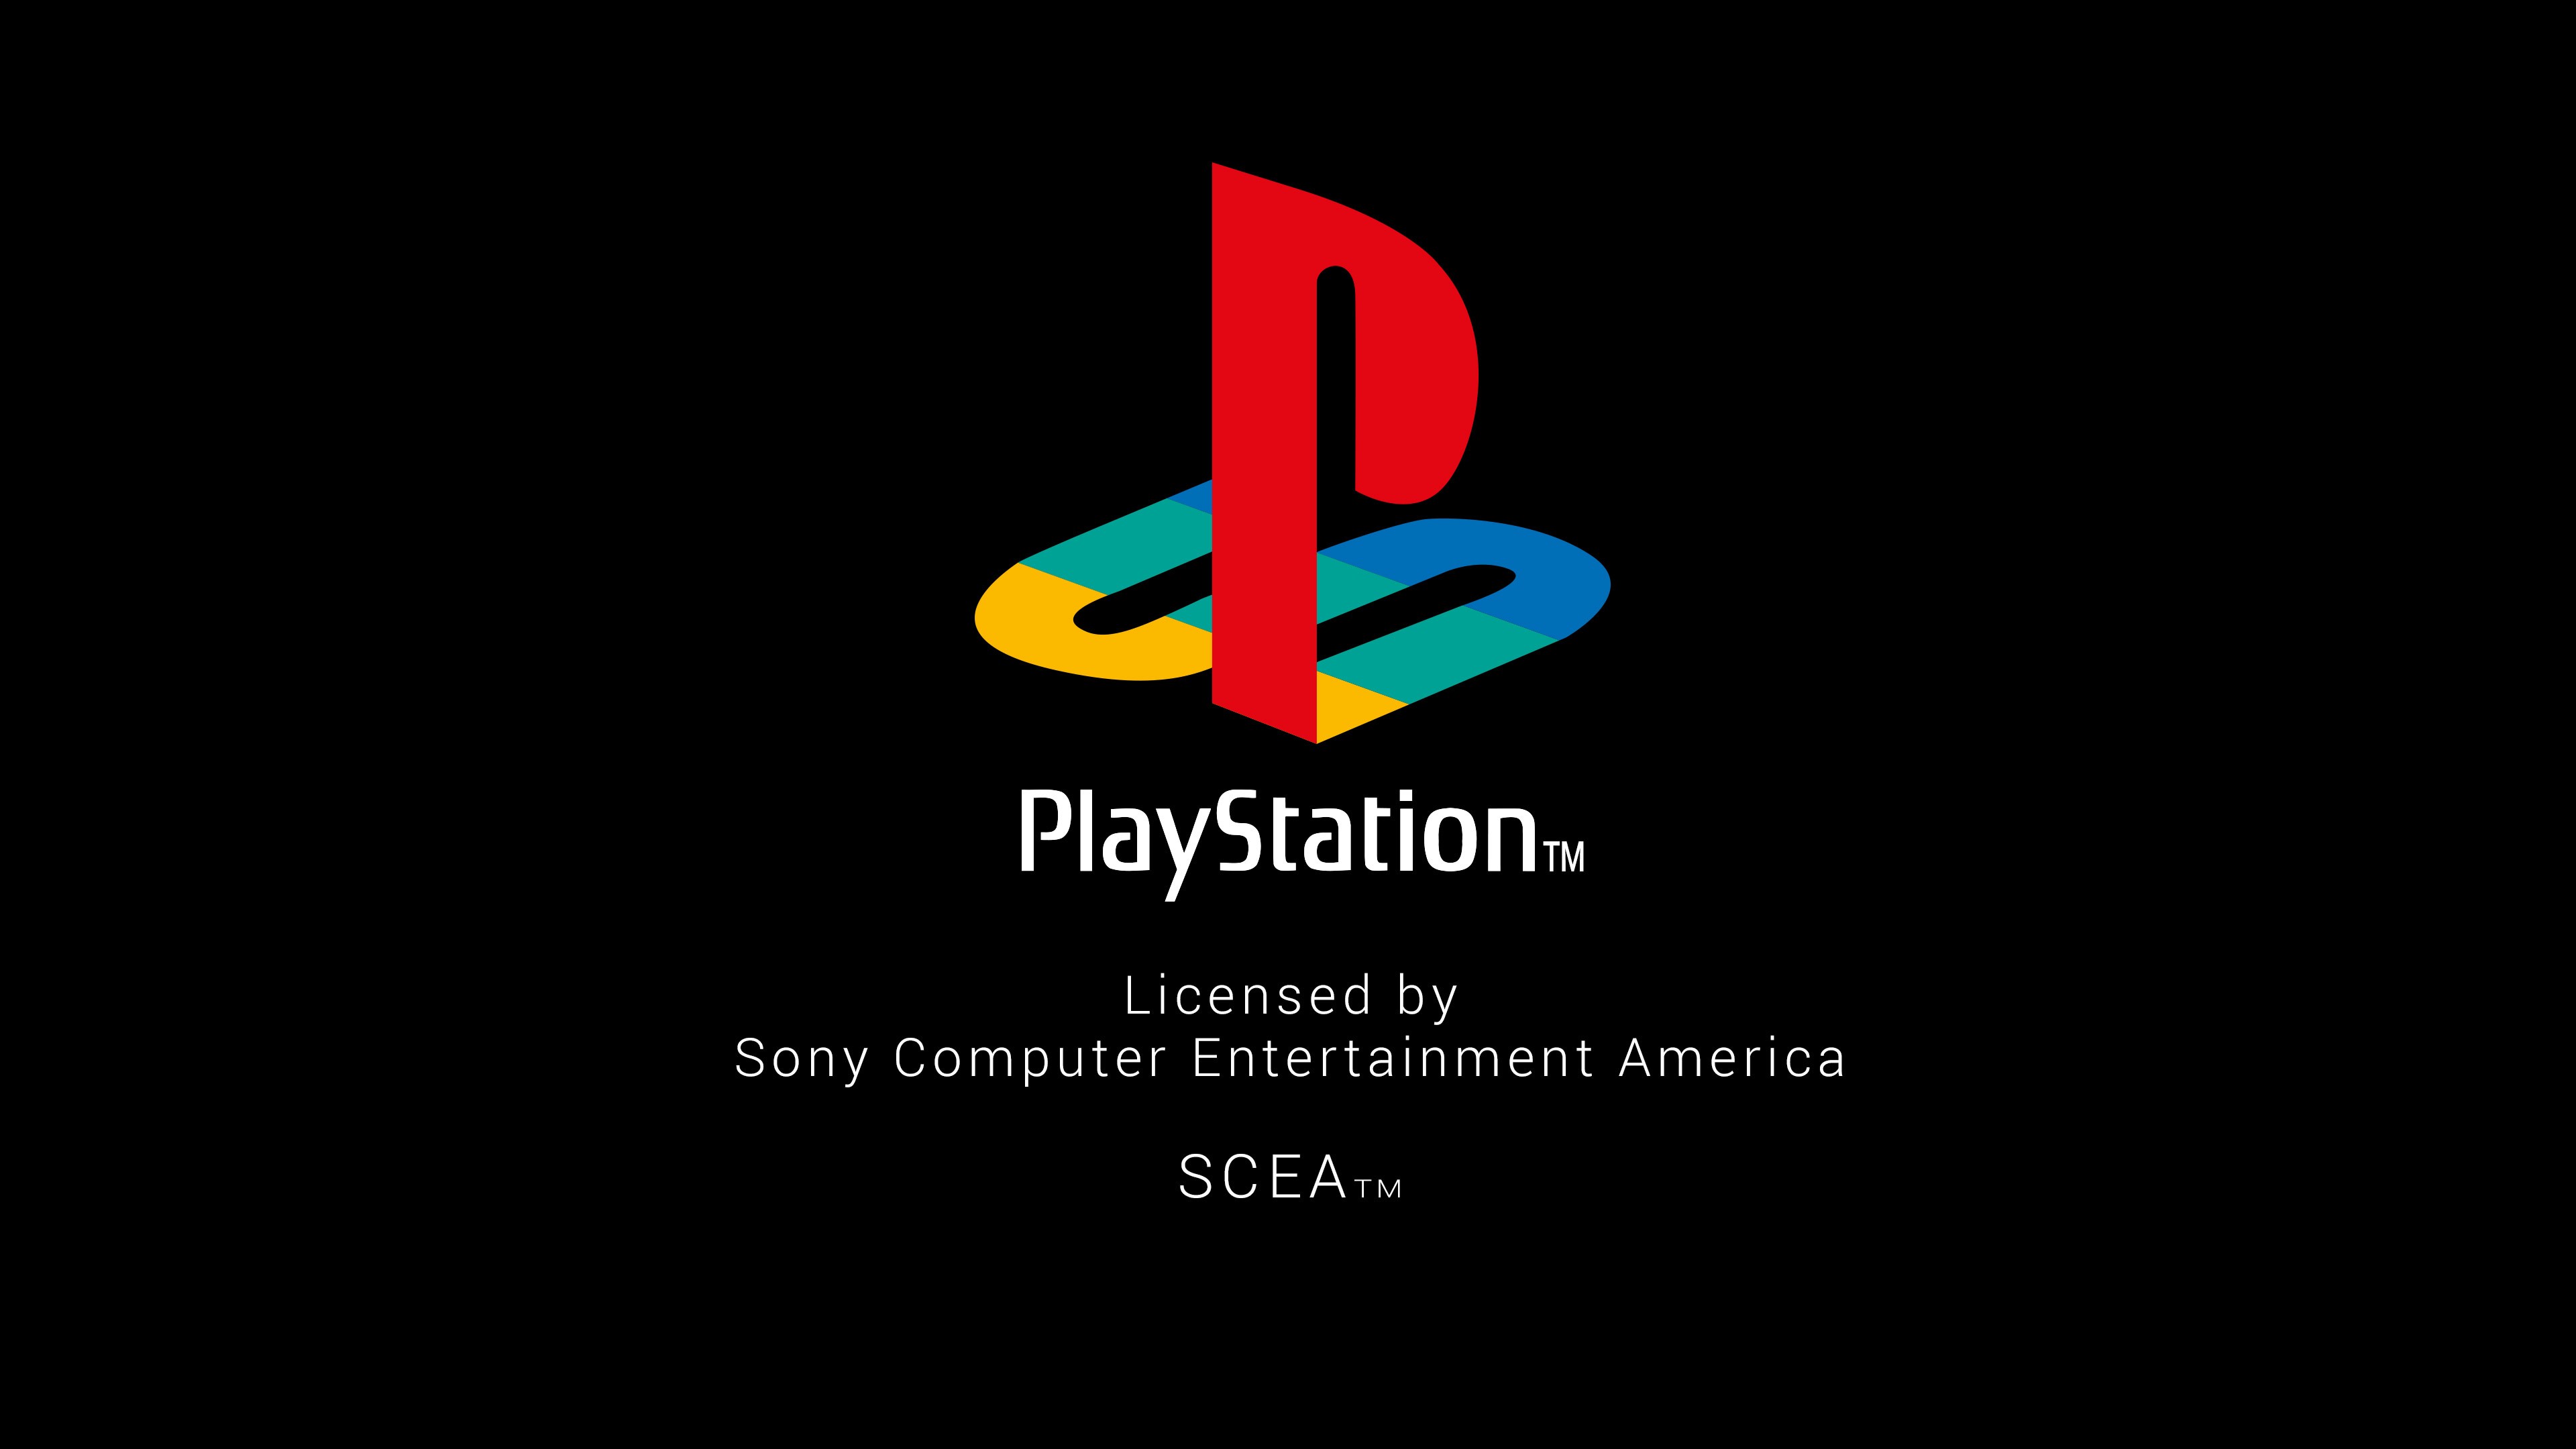 PlayStation, Video Games, Consoles, Launching, Typography Wallpaper